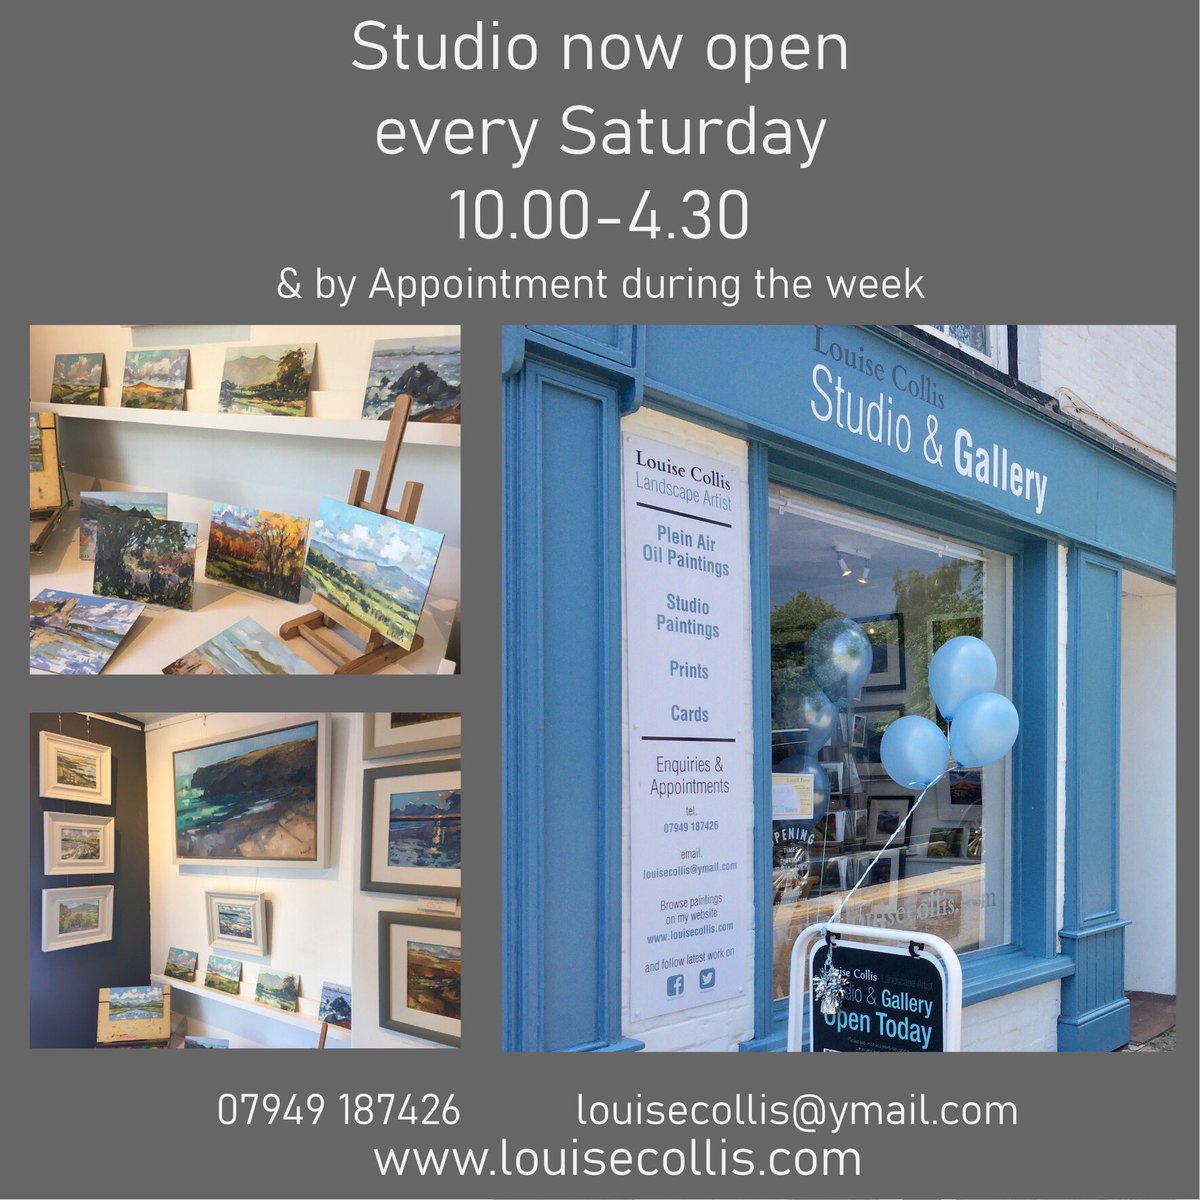 I’ll be in the studio tomorrow 10 - 4.30 if you would like to pop in a say hello. 

20 Monk Street, Abergavenny, NP7 5NP 
louisecollis.com